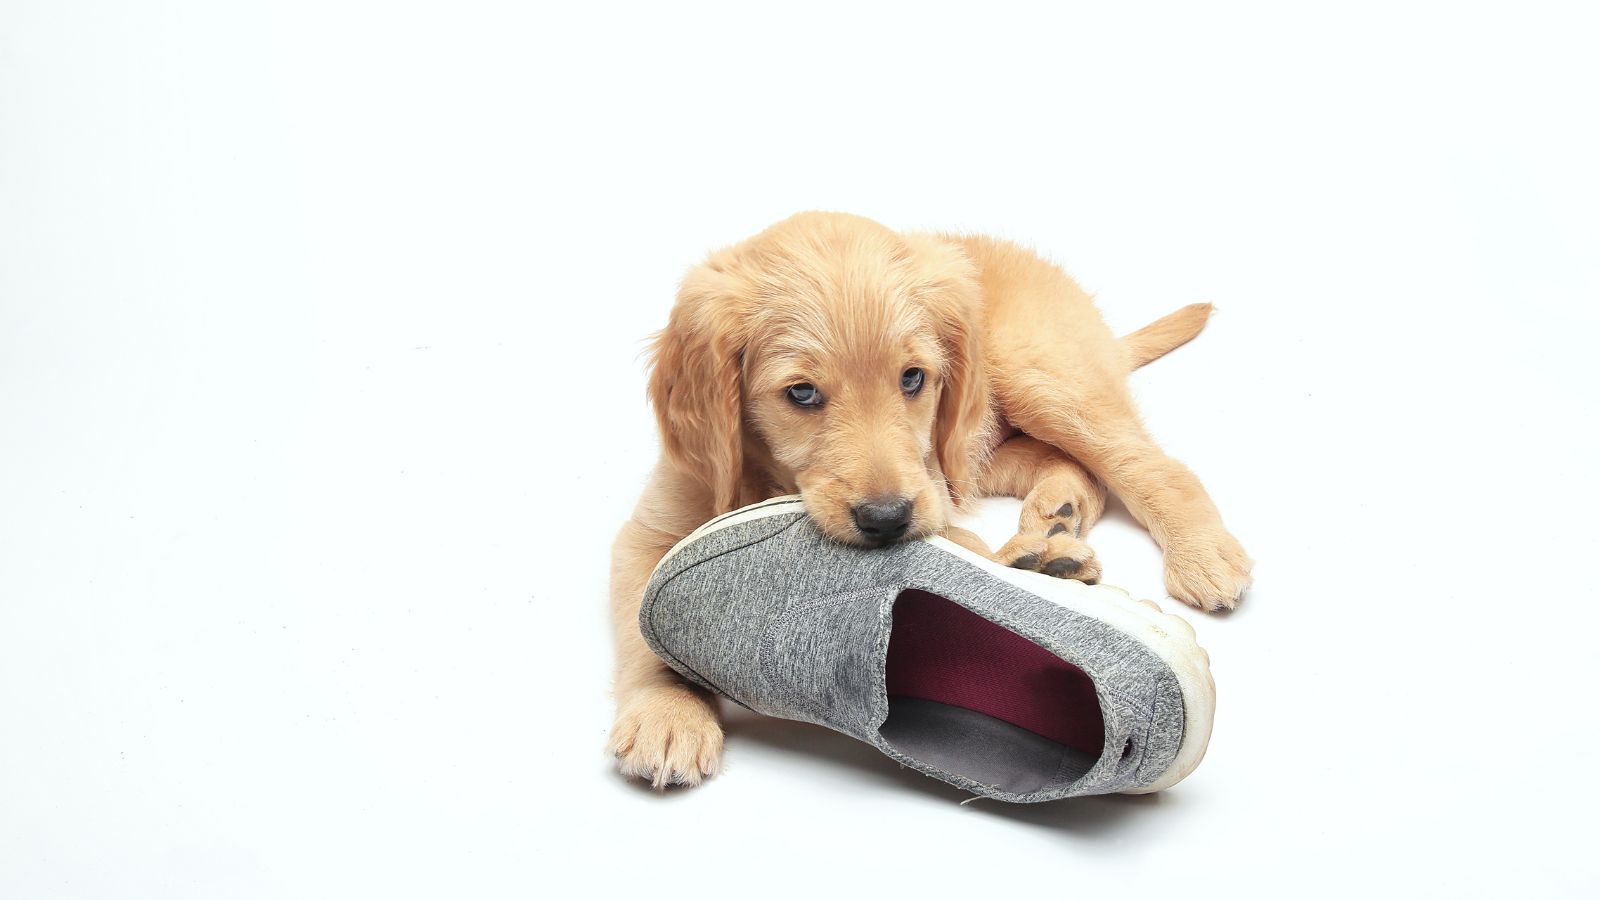 A curious goldendoodle playing with a shoe.